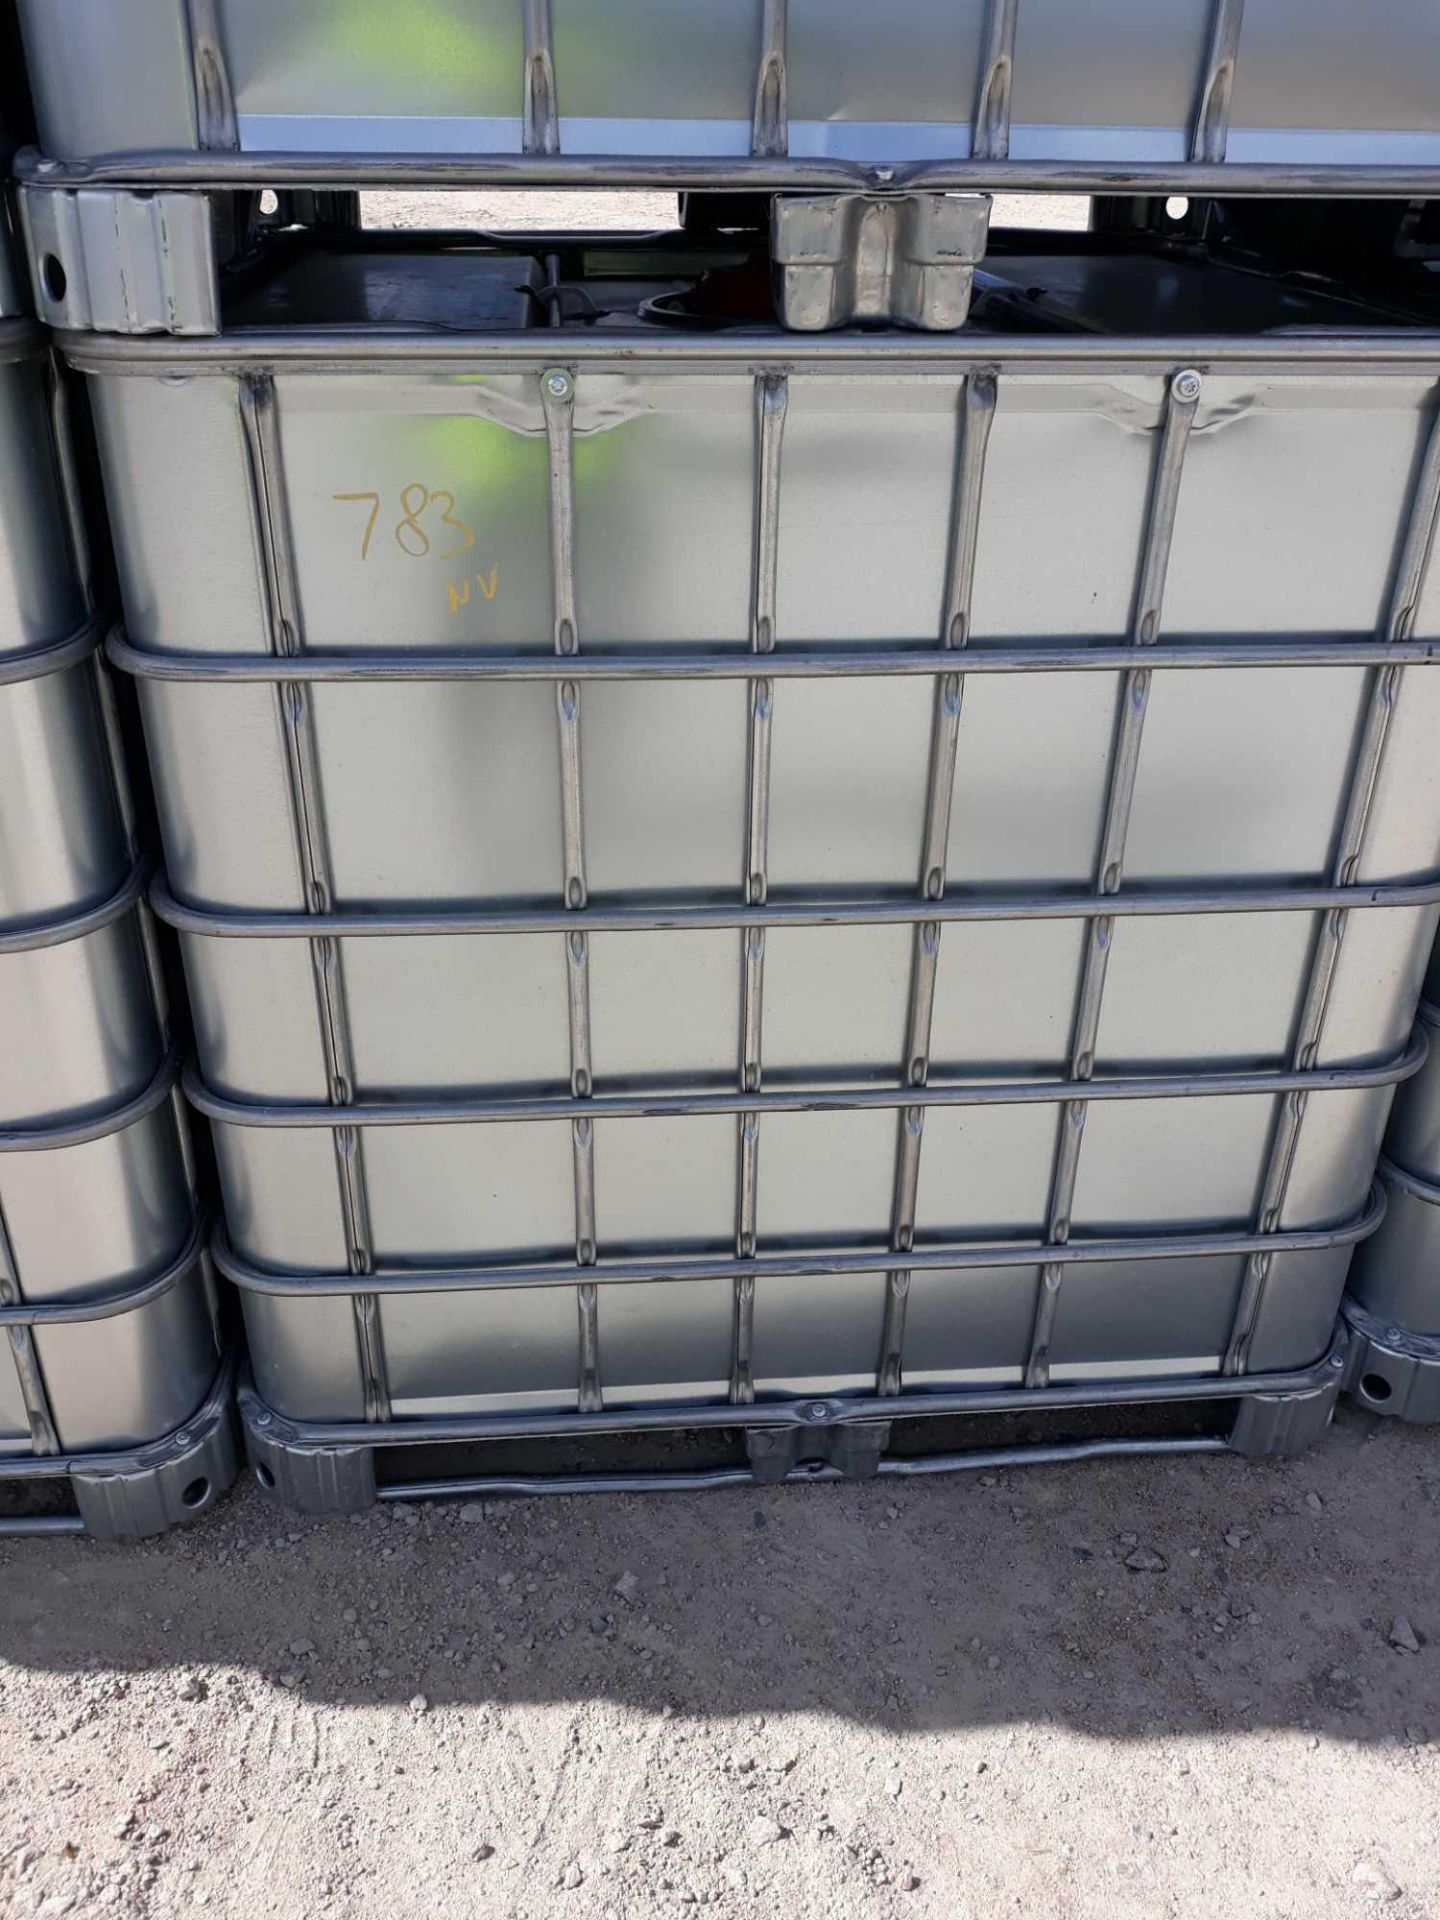 SILVER IBC TANK - CLEANED AND ATEX APPROVED